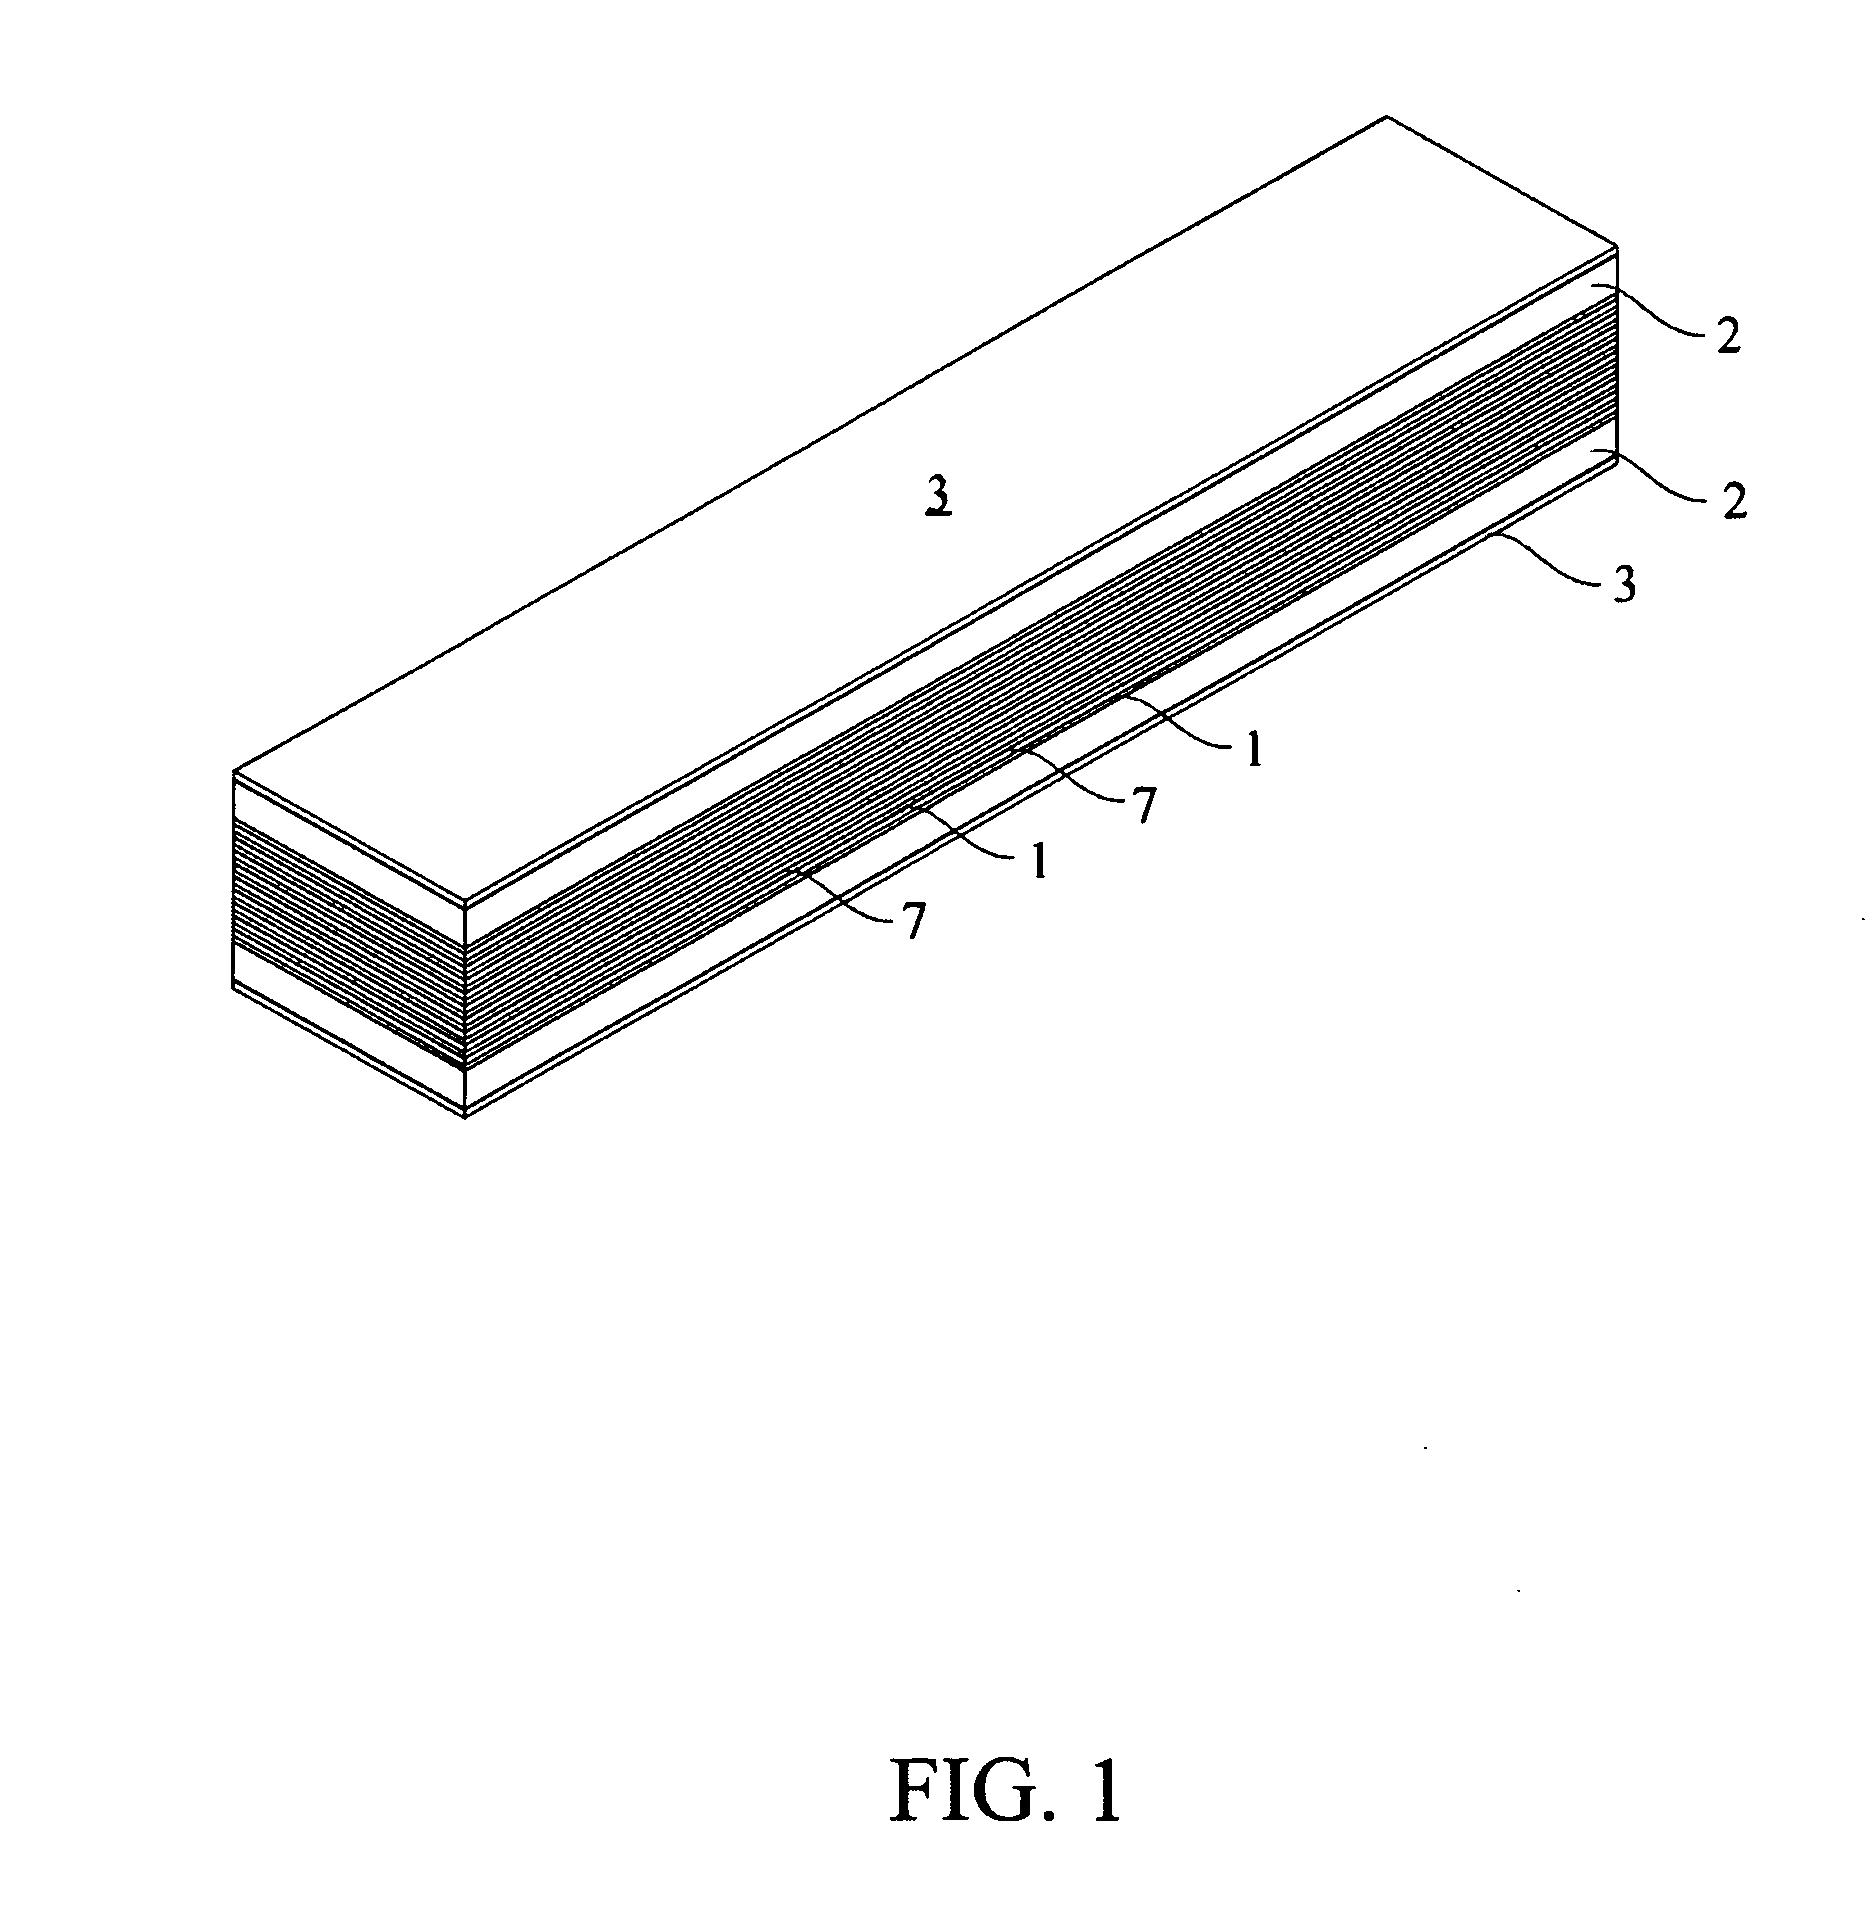 Method and apparatus for reduction of skin effect losses in electrical conductors